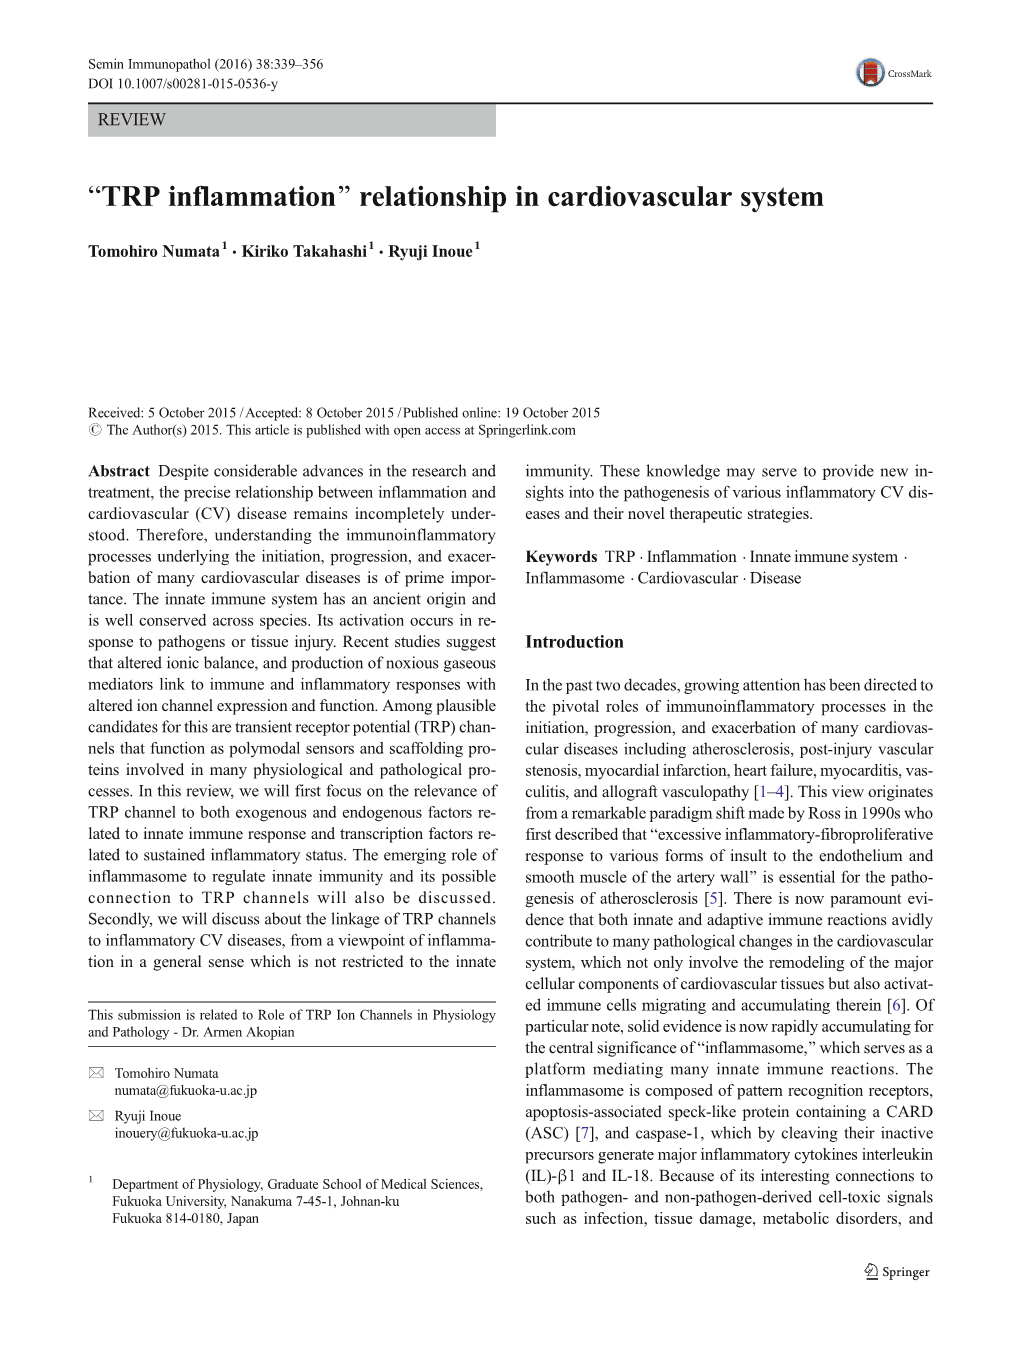 “TRP Inflammation” Relationship in Cardiovascular System